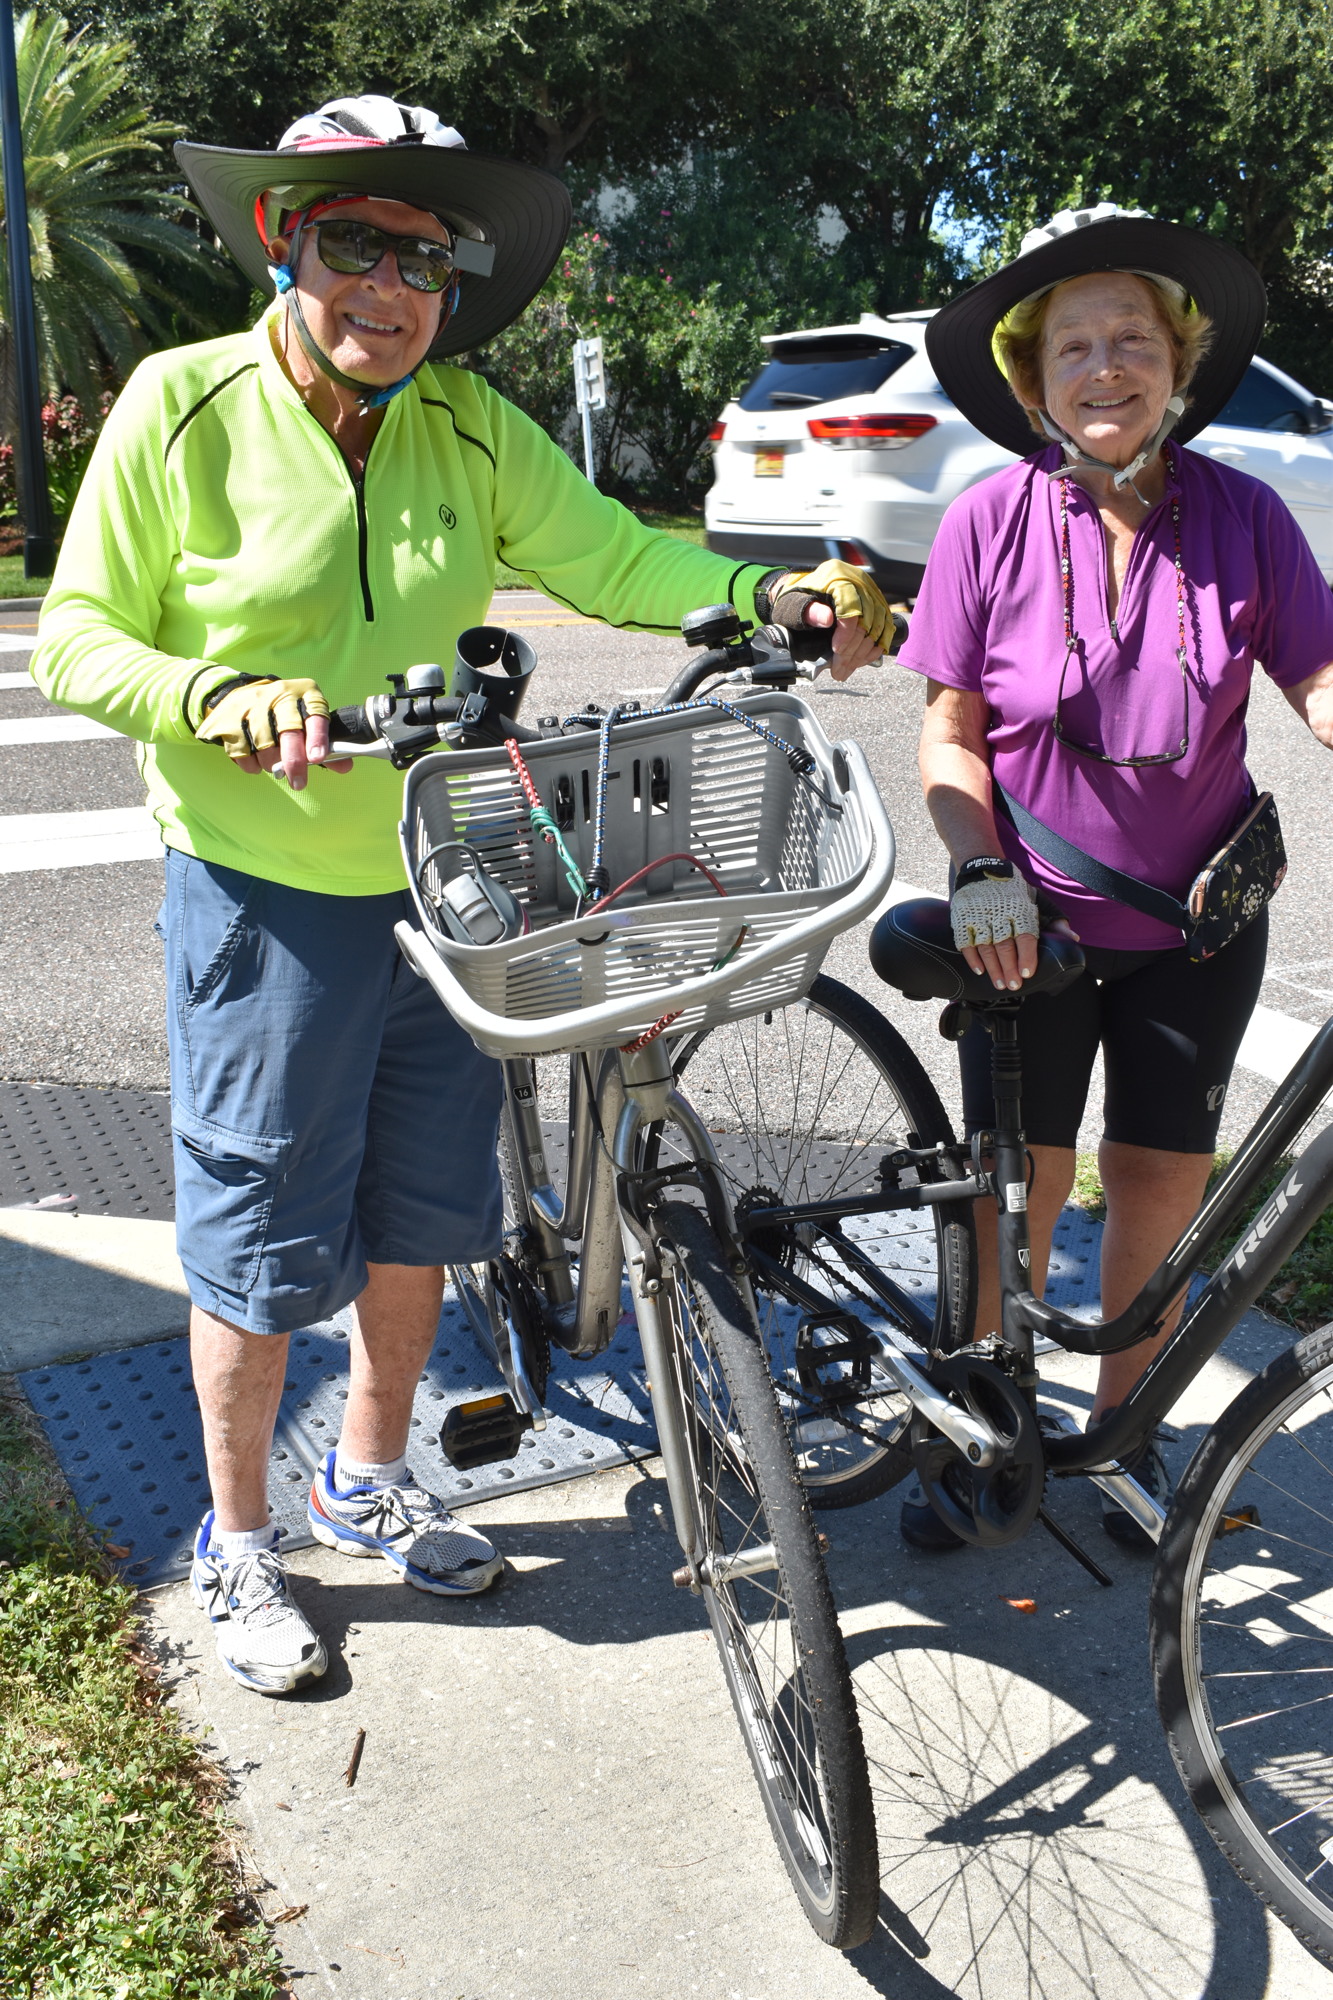 Longboat Key residents Sheila and Jack Marks say they wait for cars to stop to safely cross Gulf of Mexico Drive.